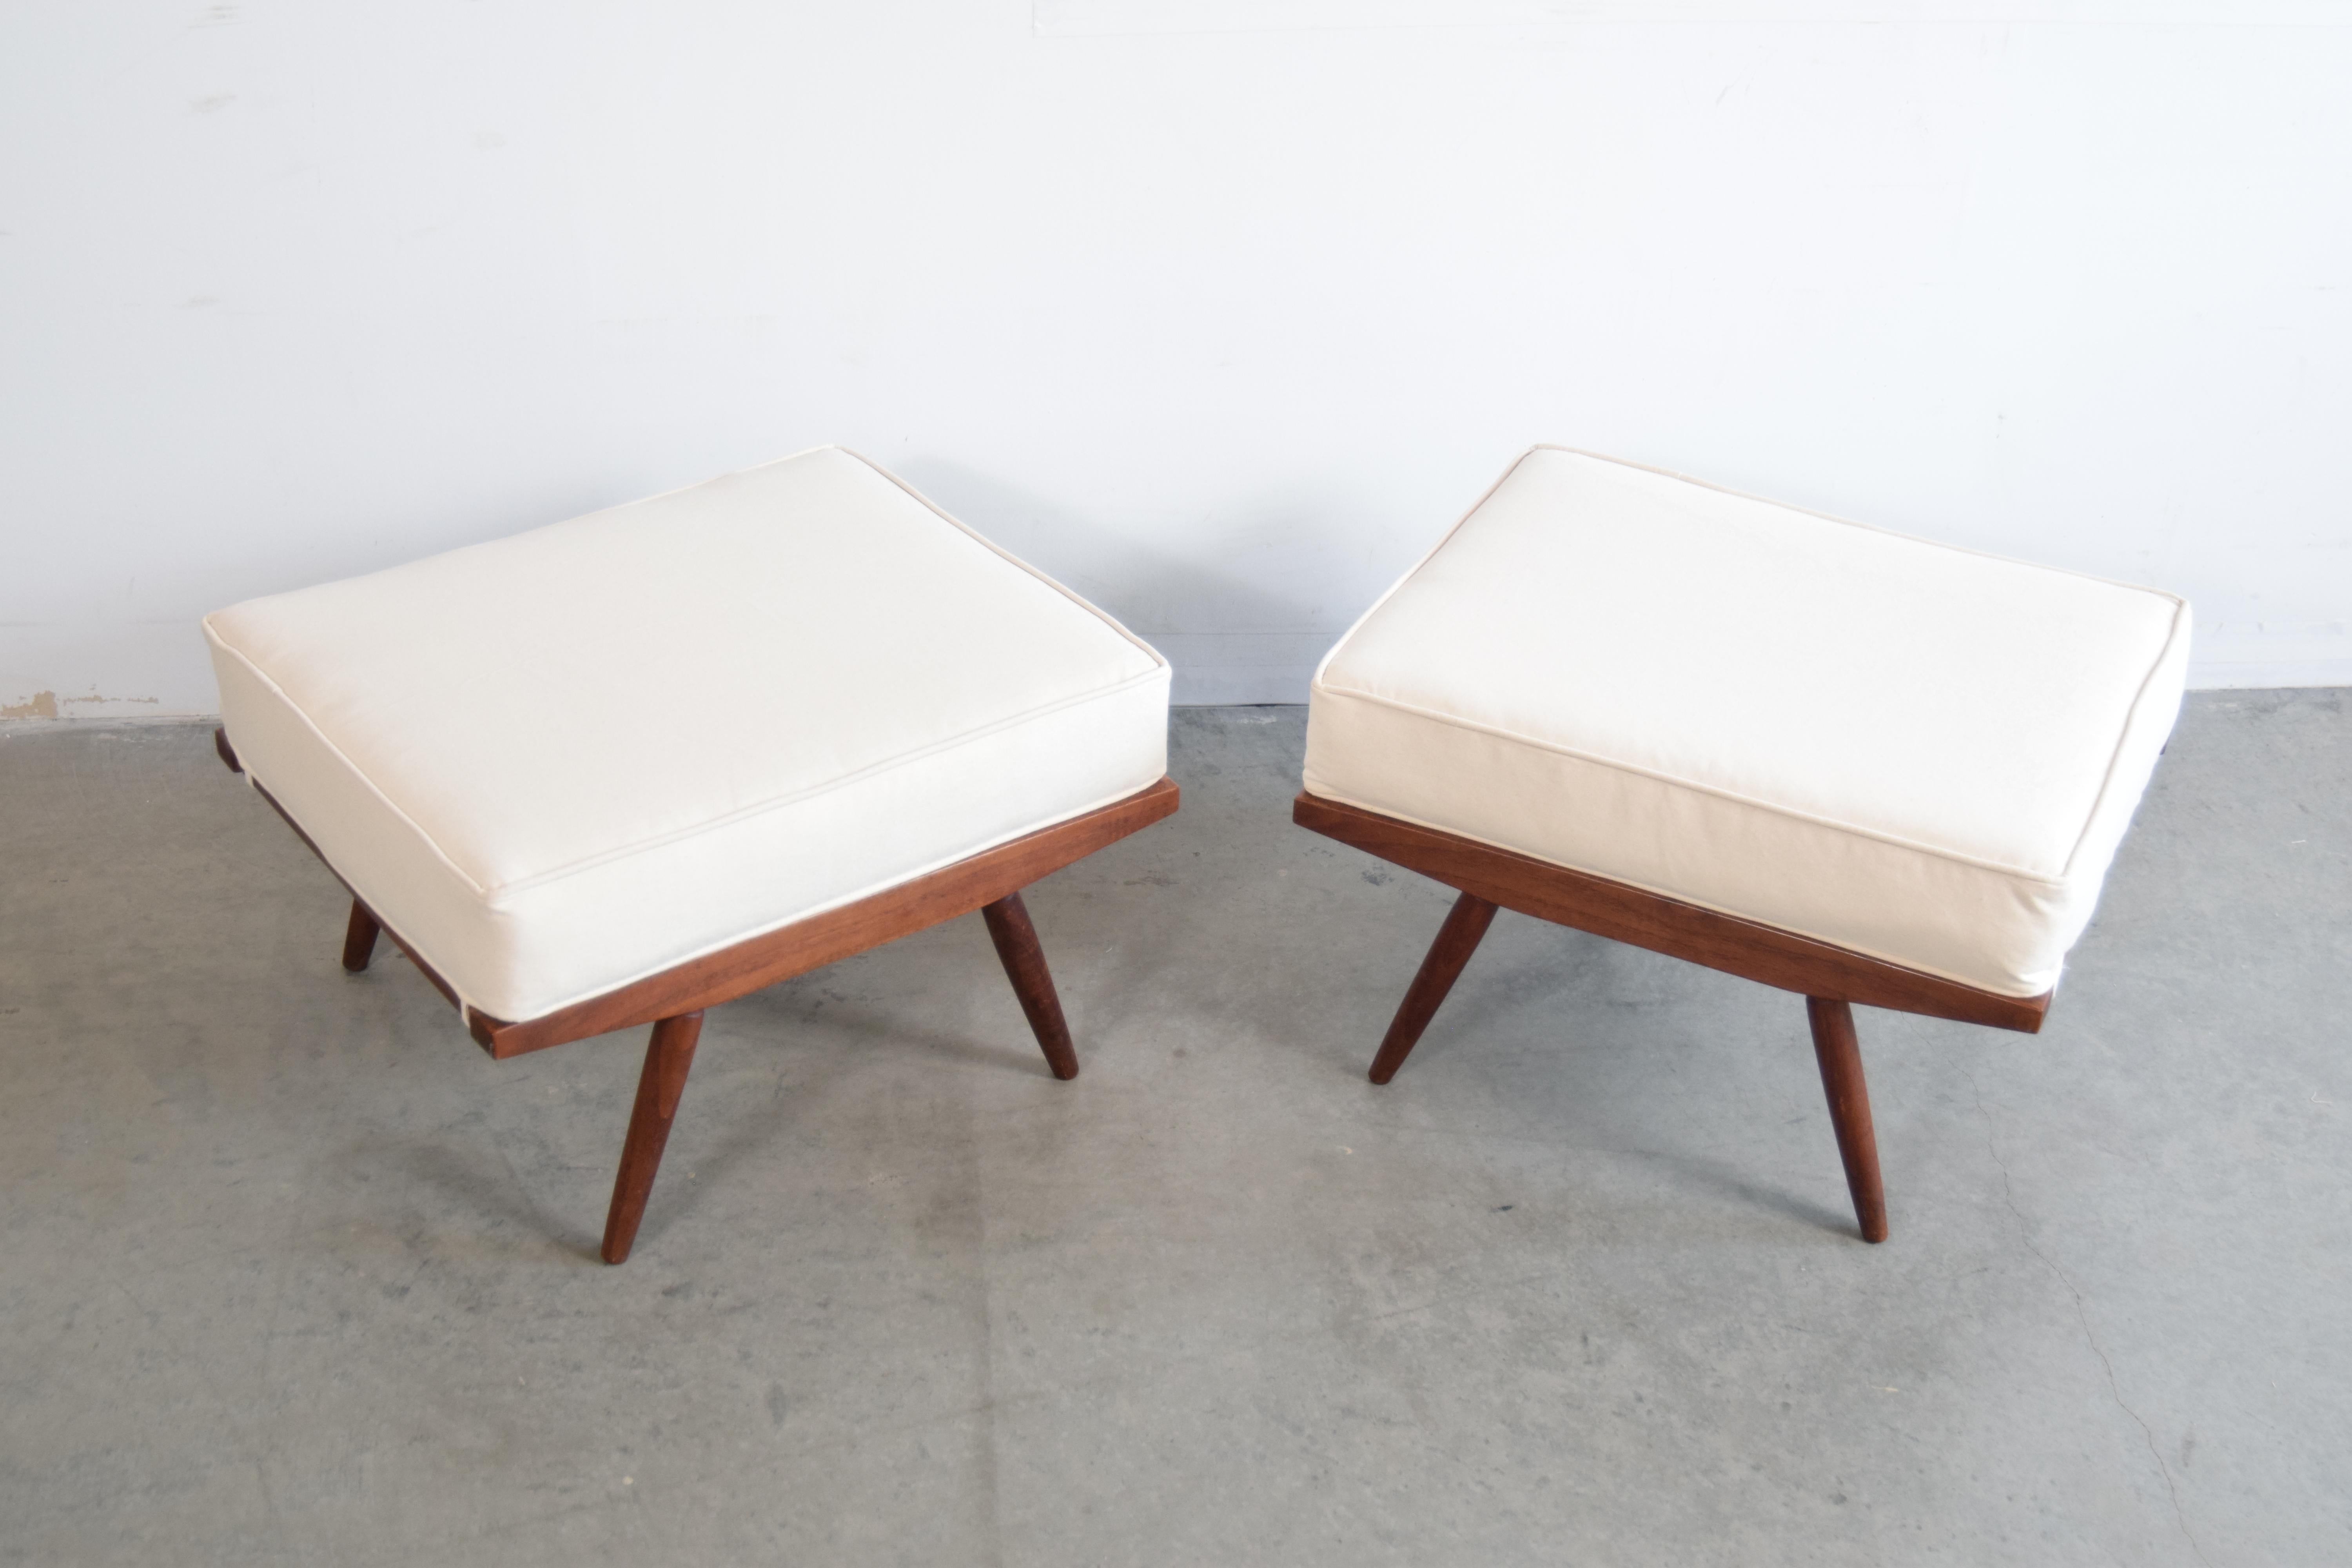 Pair of George Nakashima (1905 - 1990) for Widdiicomb ottomans, circa 1958. Nakashima designed these as part of his 'Origins' line for Widdicomb. These have just been professionally re-upholstered in 100% organic cotton canvas. If you look closely